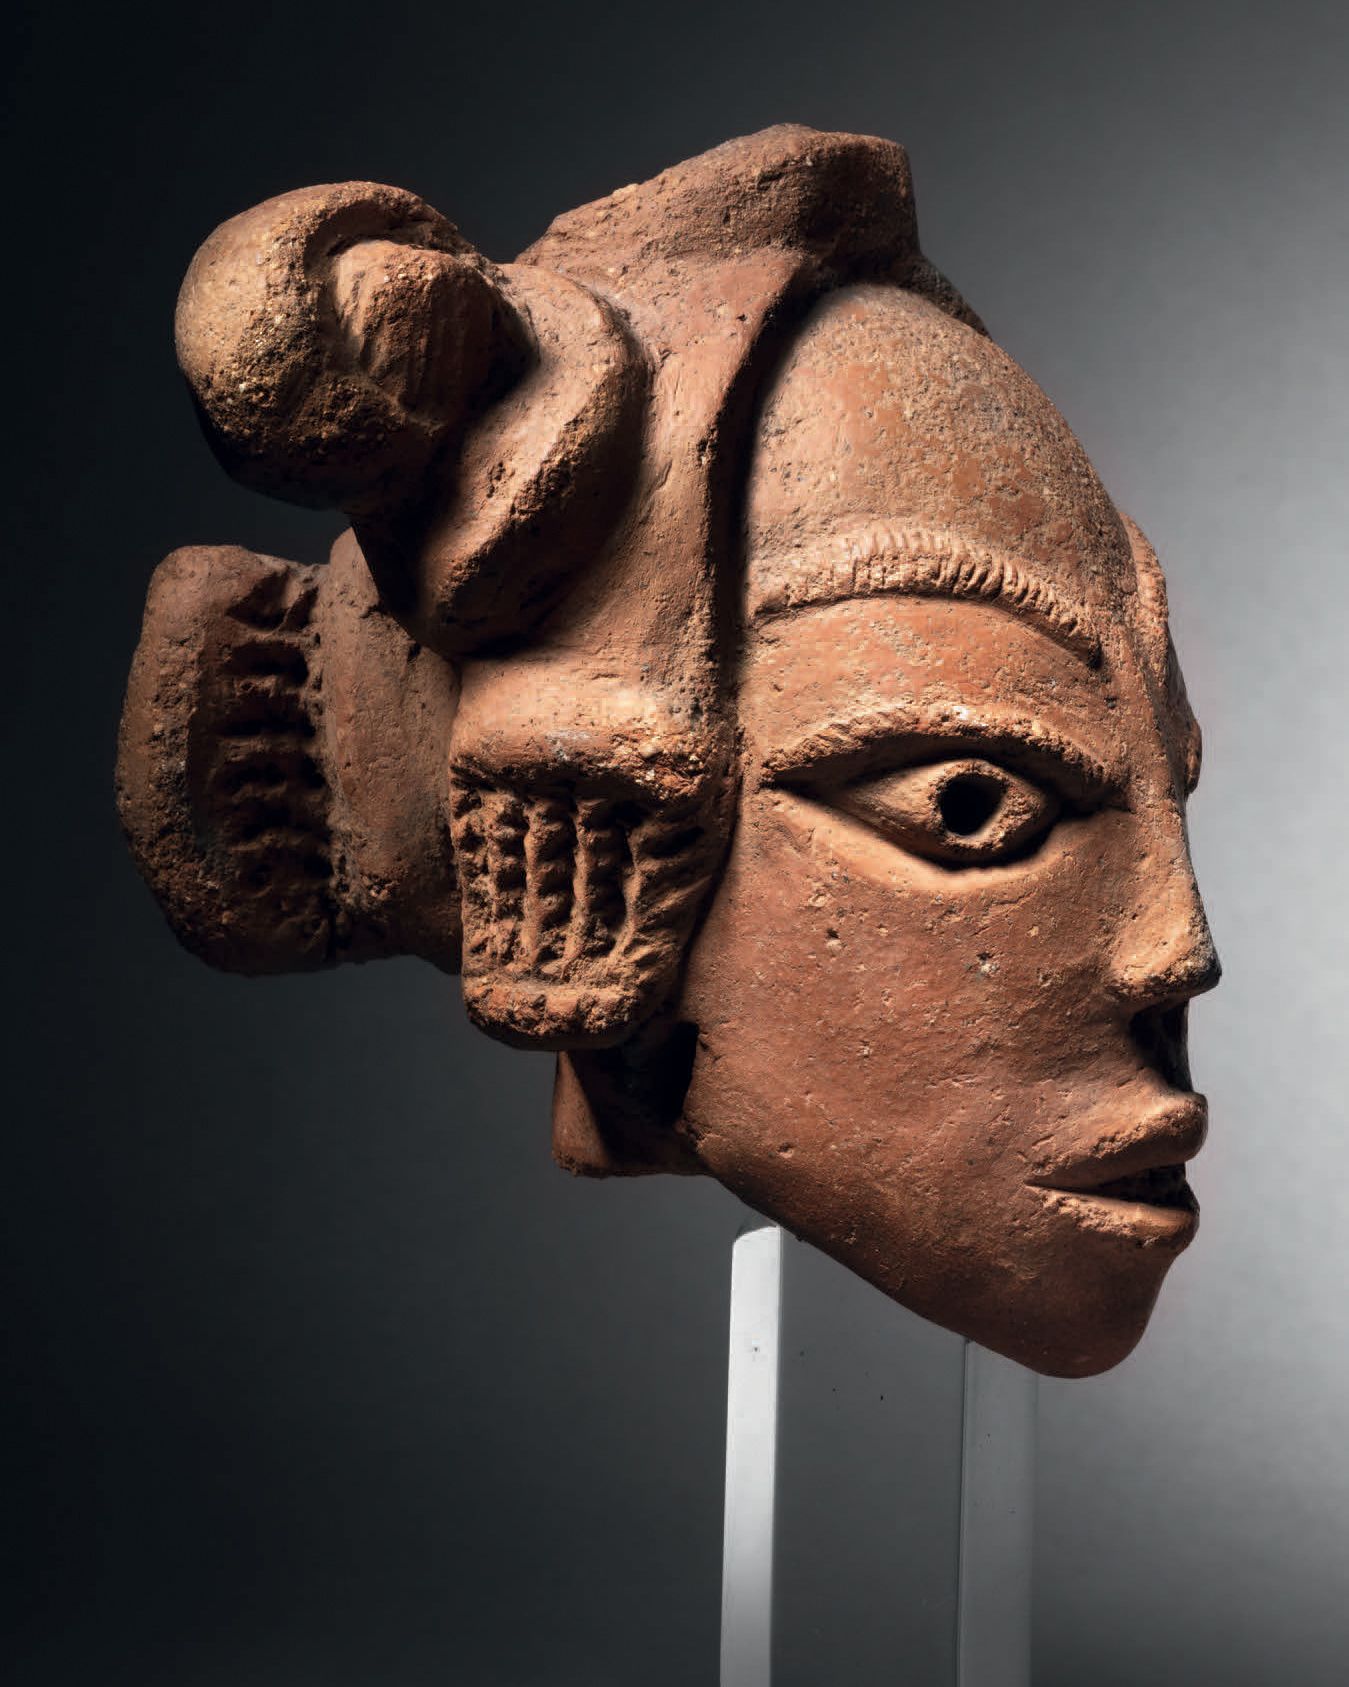 Null Nok head, Nigeria
Terracotta made of red clay
H. 16.5 cm
Thermoluminescence&hellip;